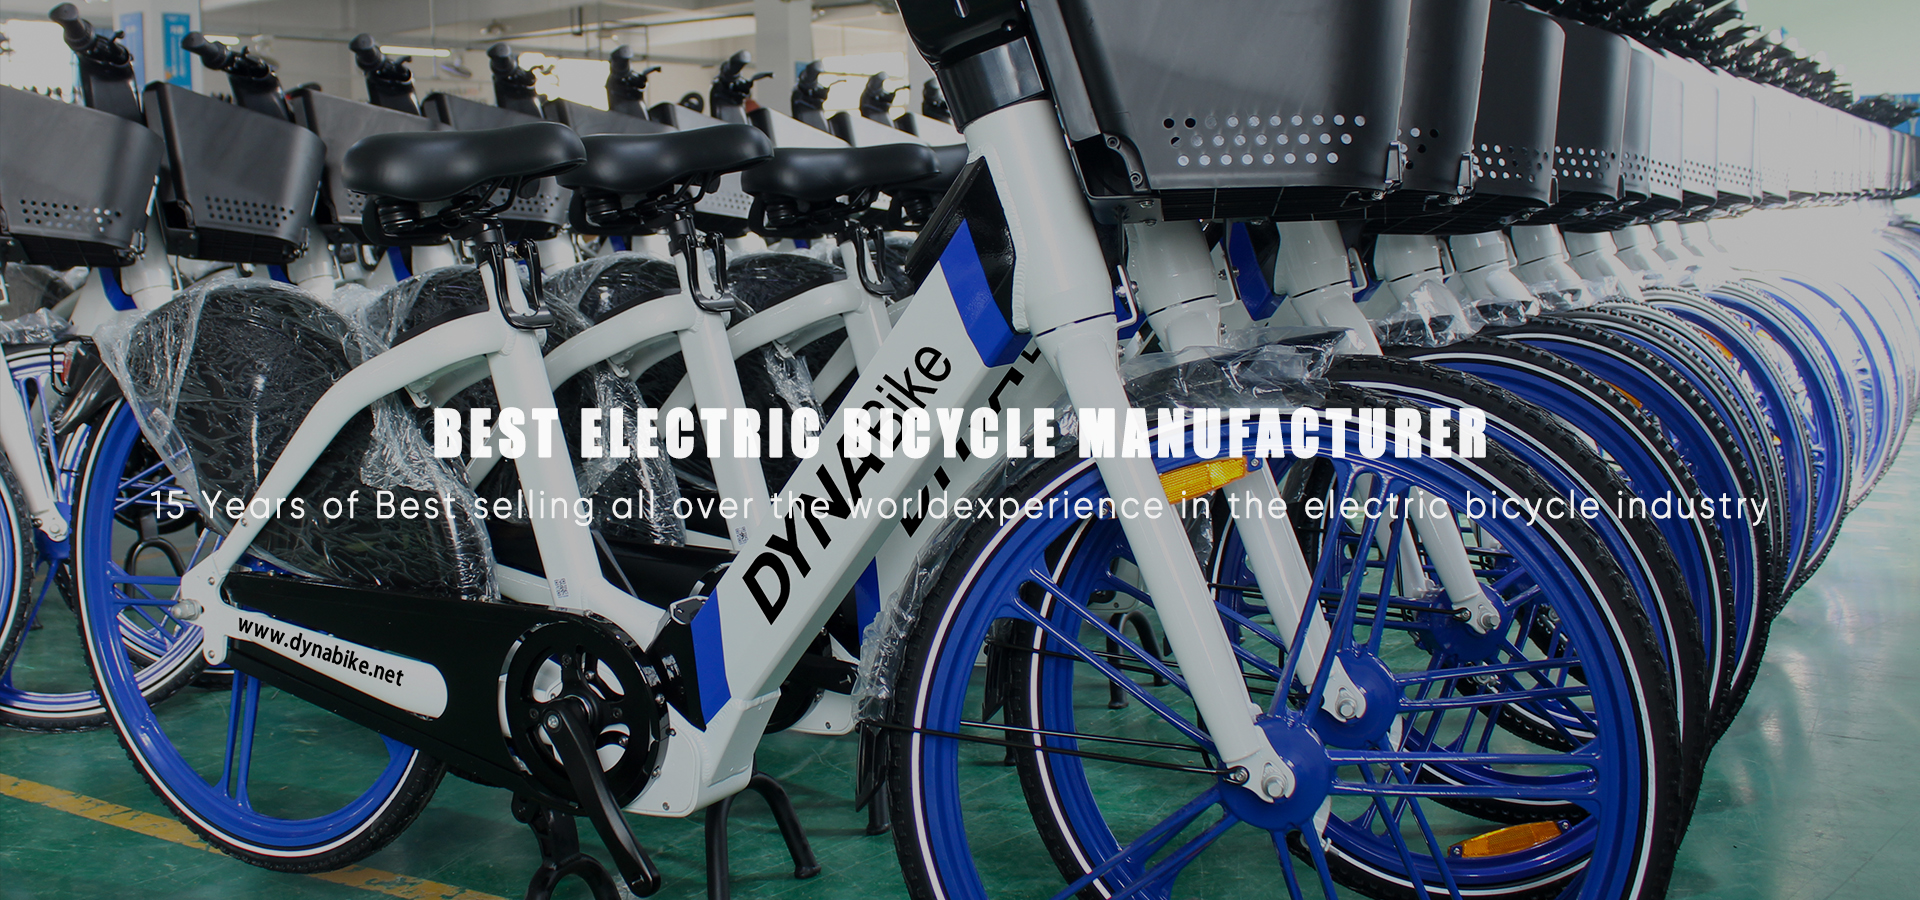 BEST ELECTRIC BICYCLE MANUFACTURER